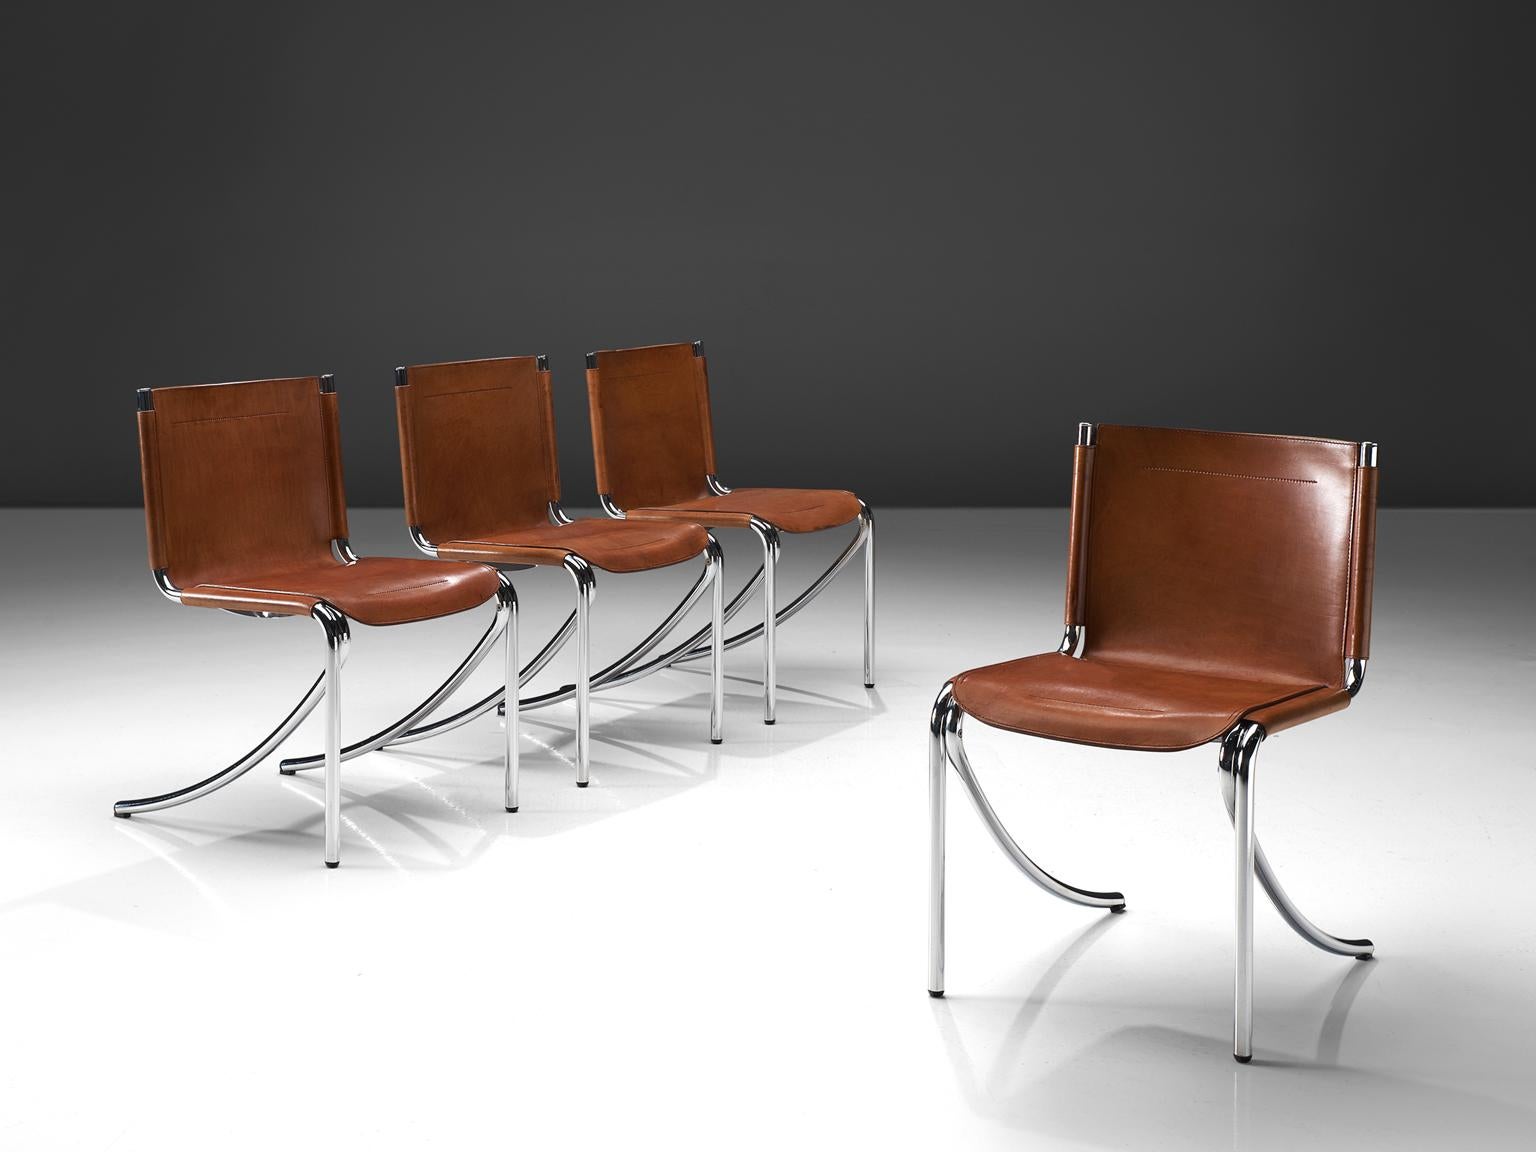 Giotto Stoppino, 'Jot' chairs, cognac leather and steel, Italy, 1971.

This elegant set of cantilevered tubular frame chairs are executed with the finest brown leather that is used as a shell for both seat and back. The sides of the chair feature